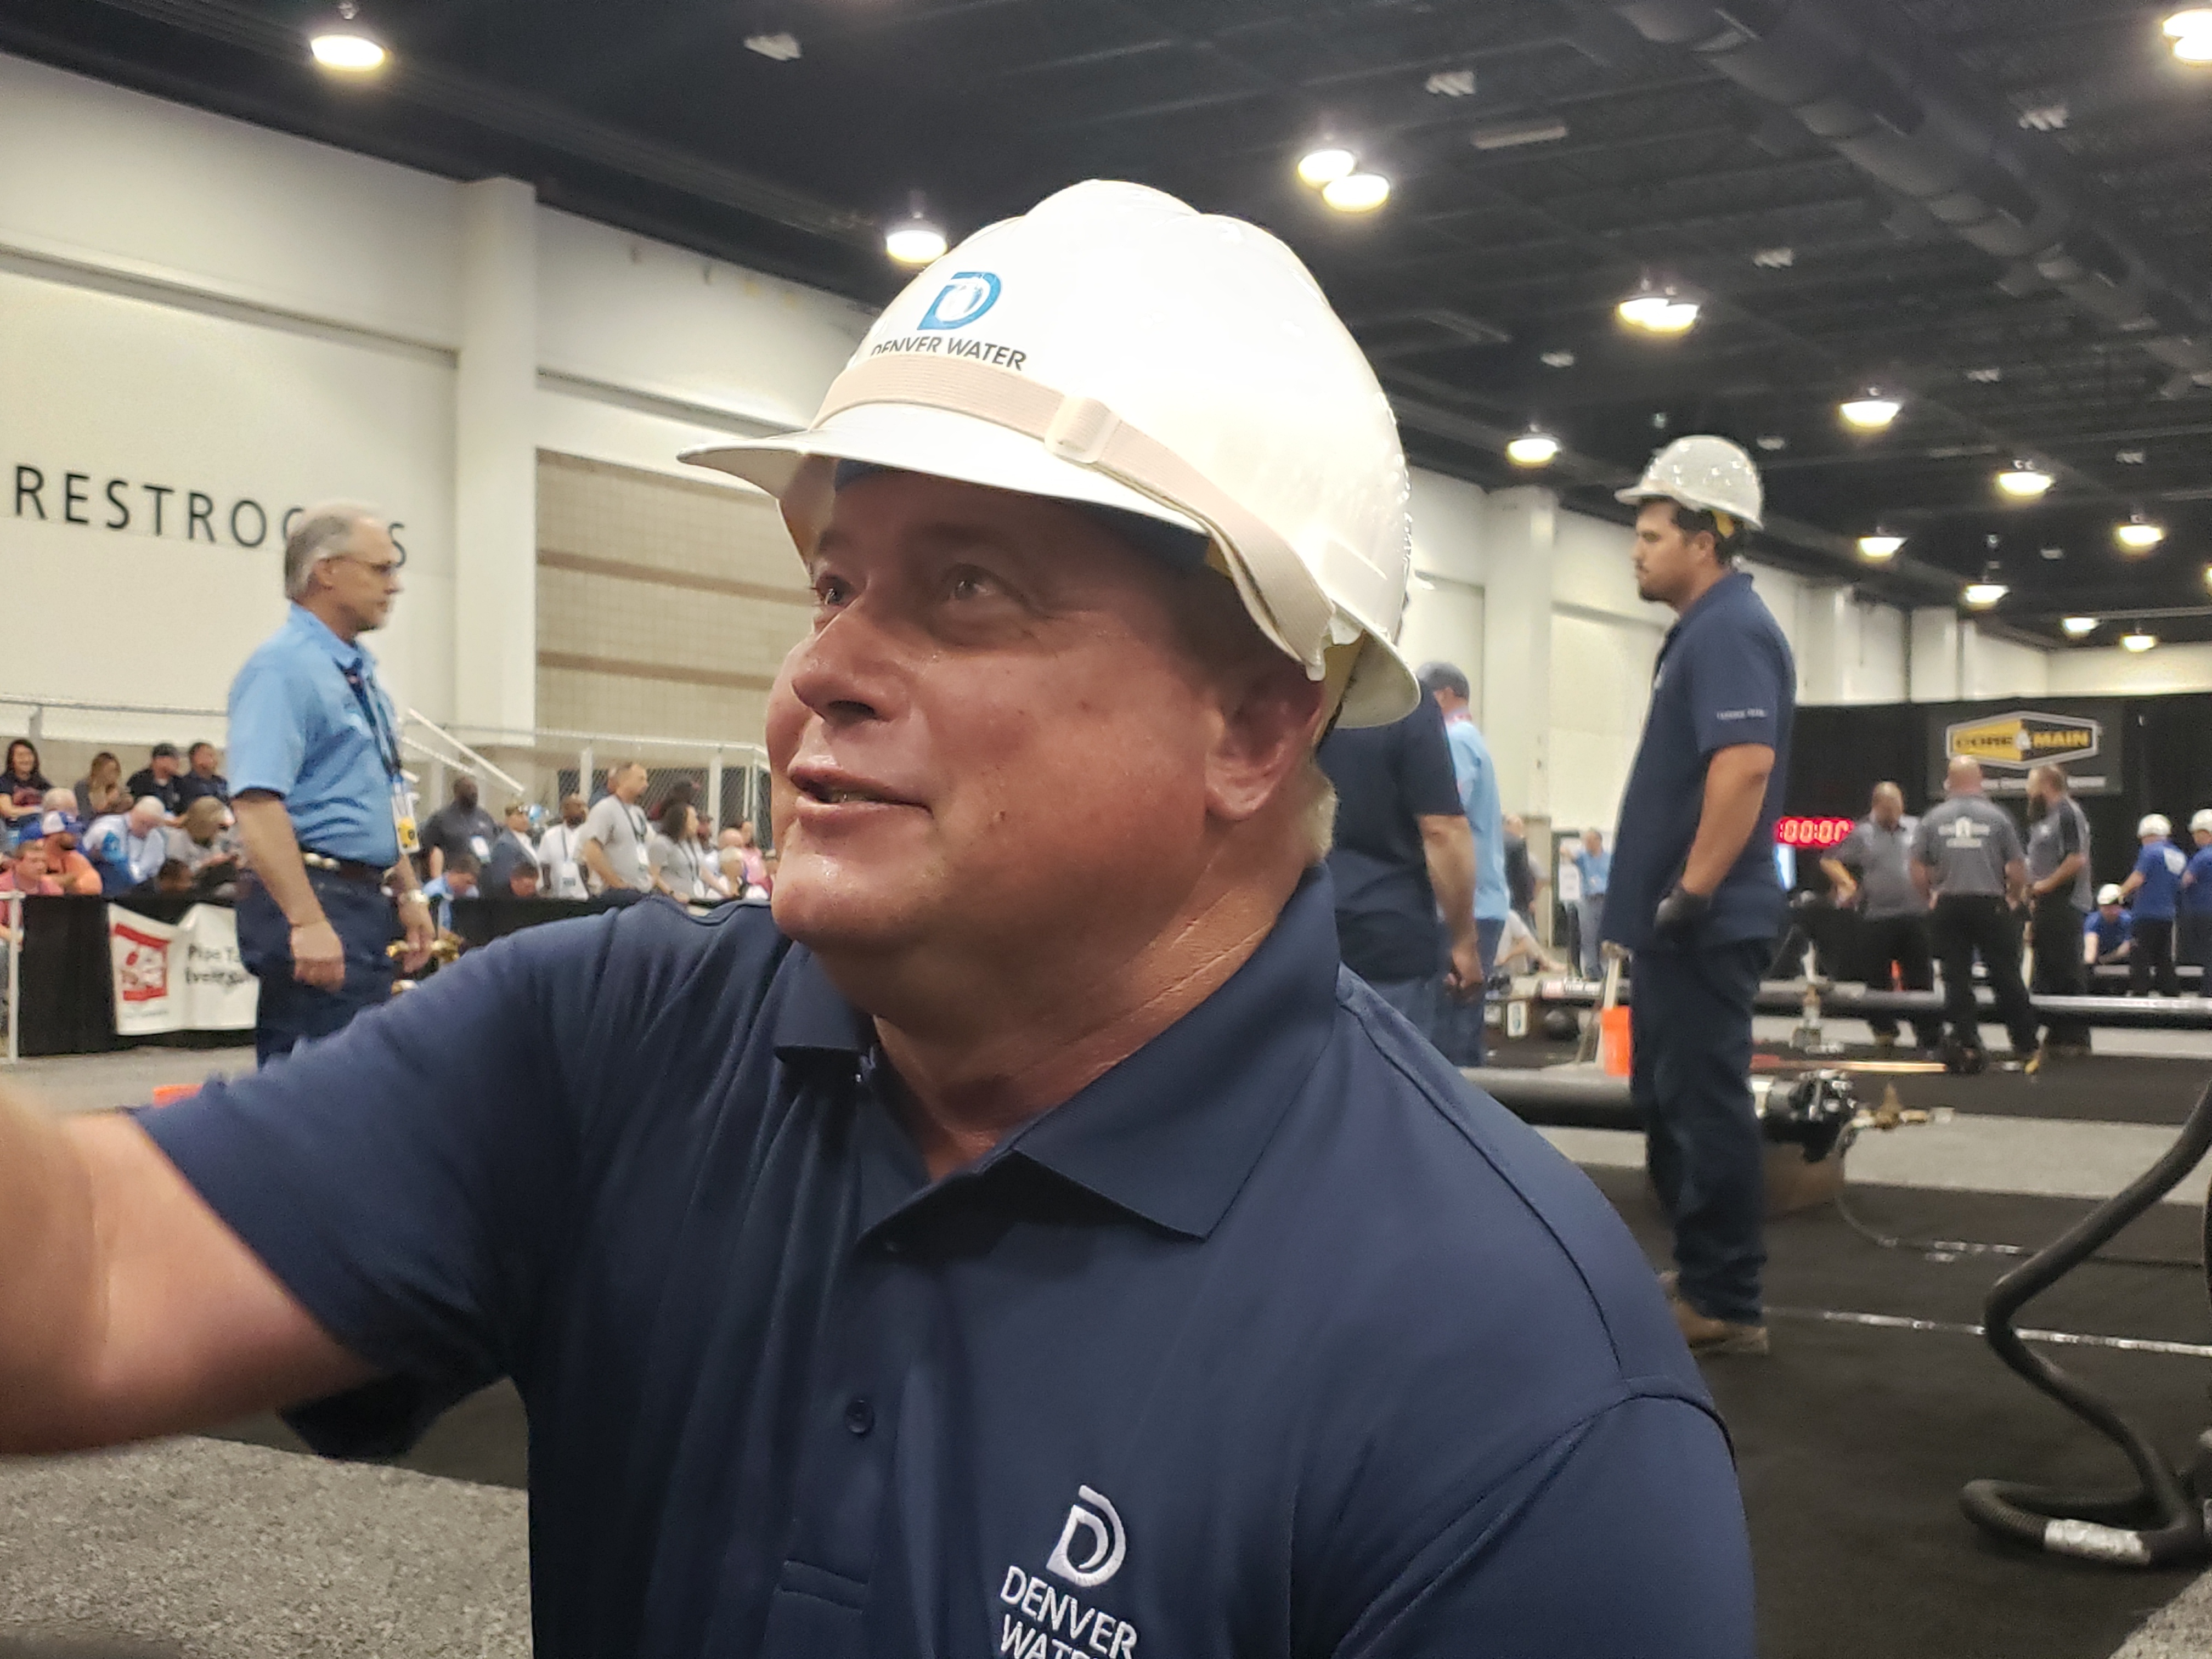 A man in a Denver Water hard hat smiles at friends in an exhibit hall.